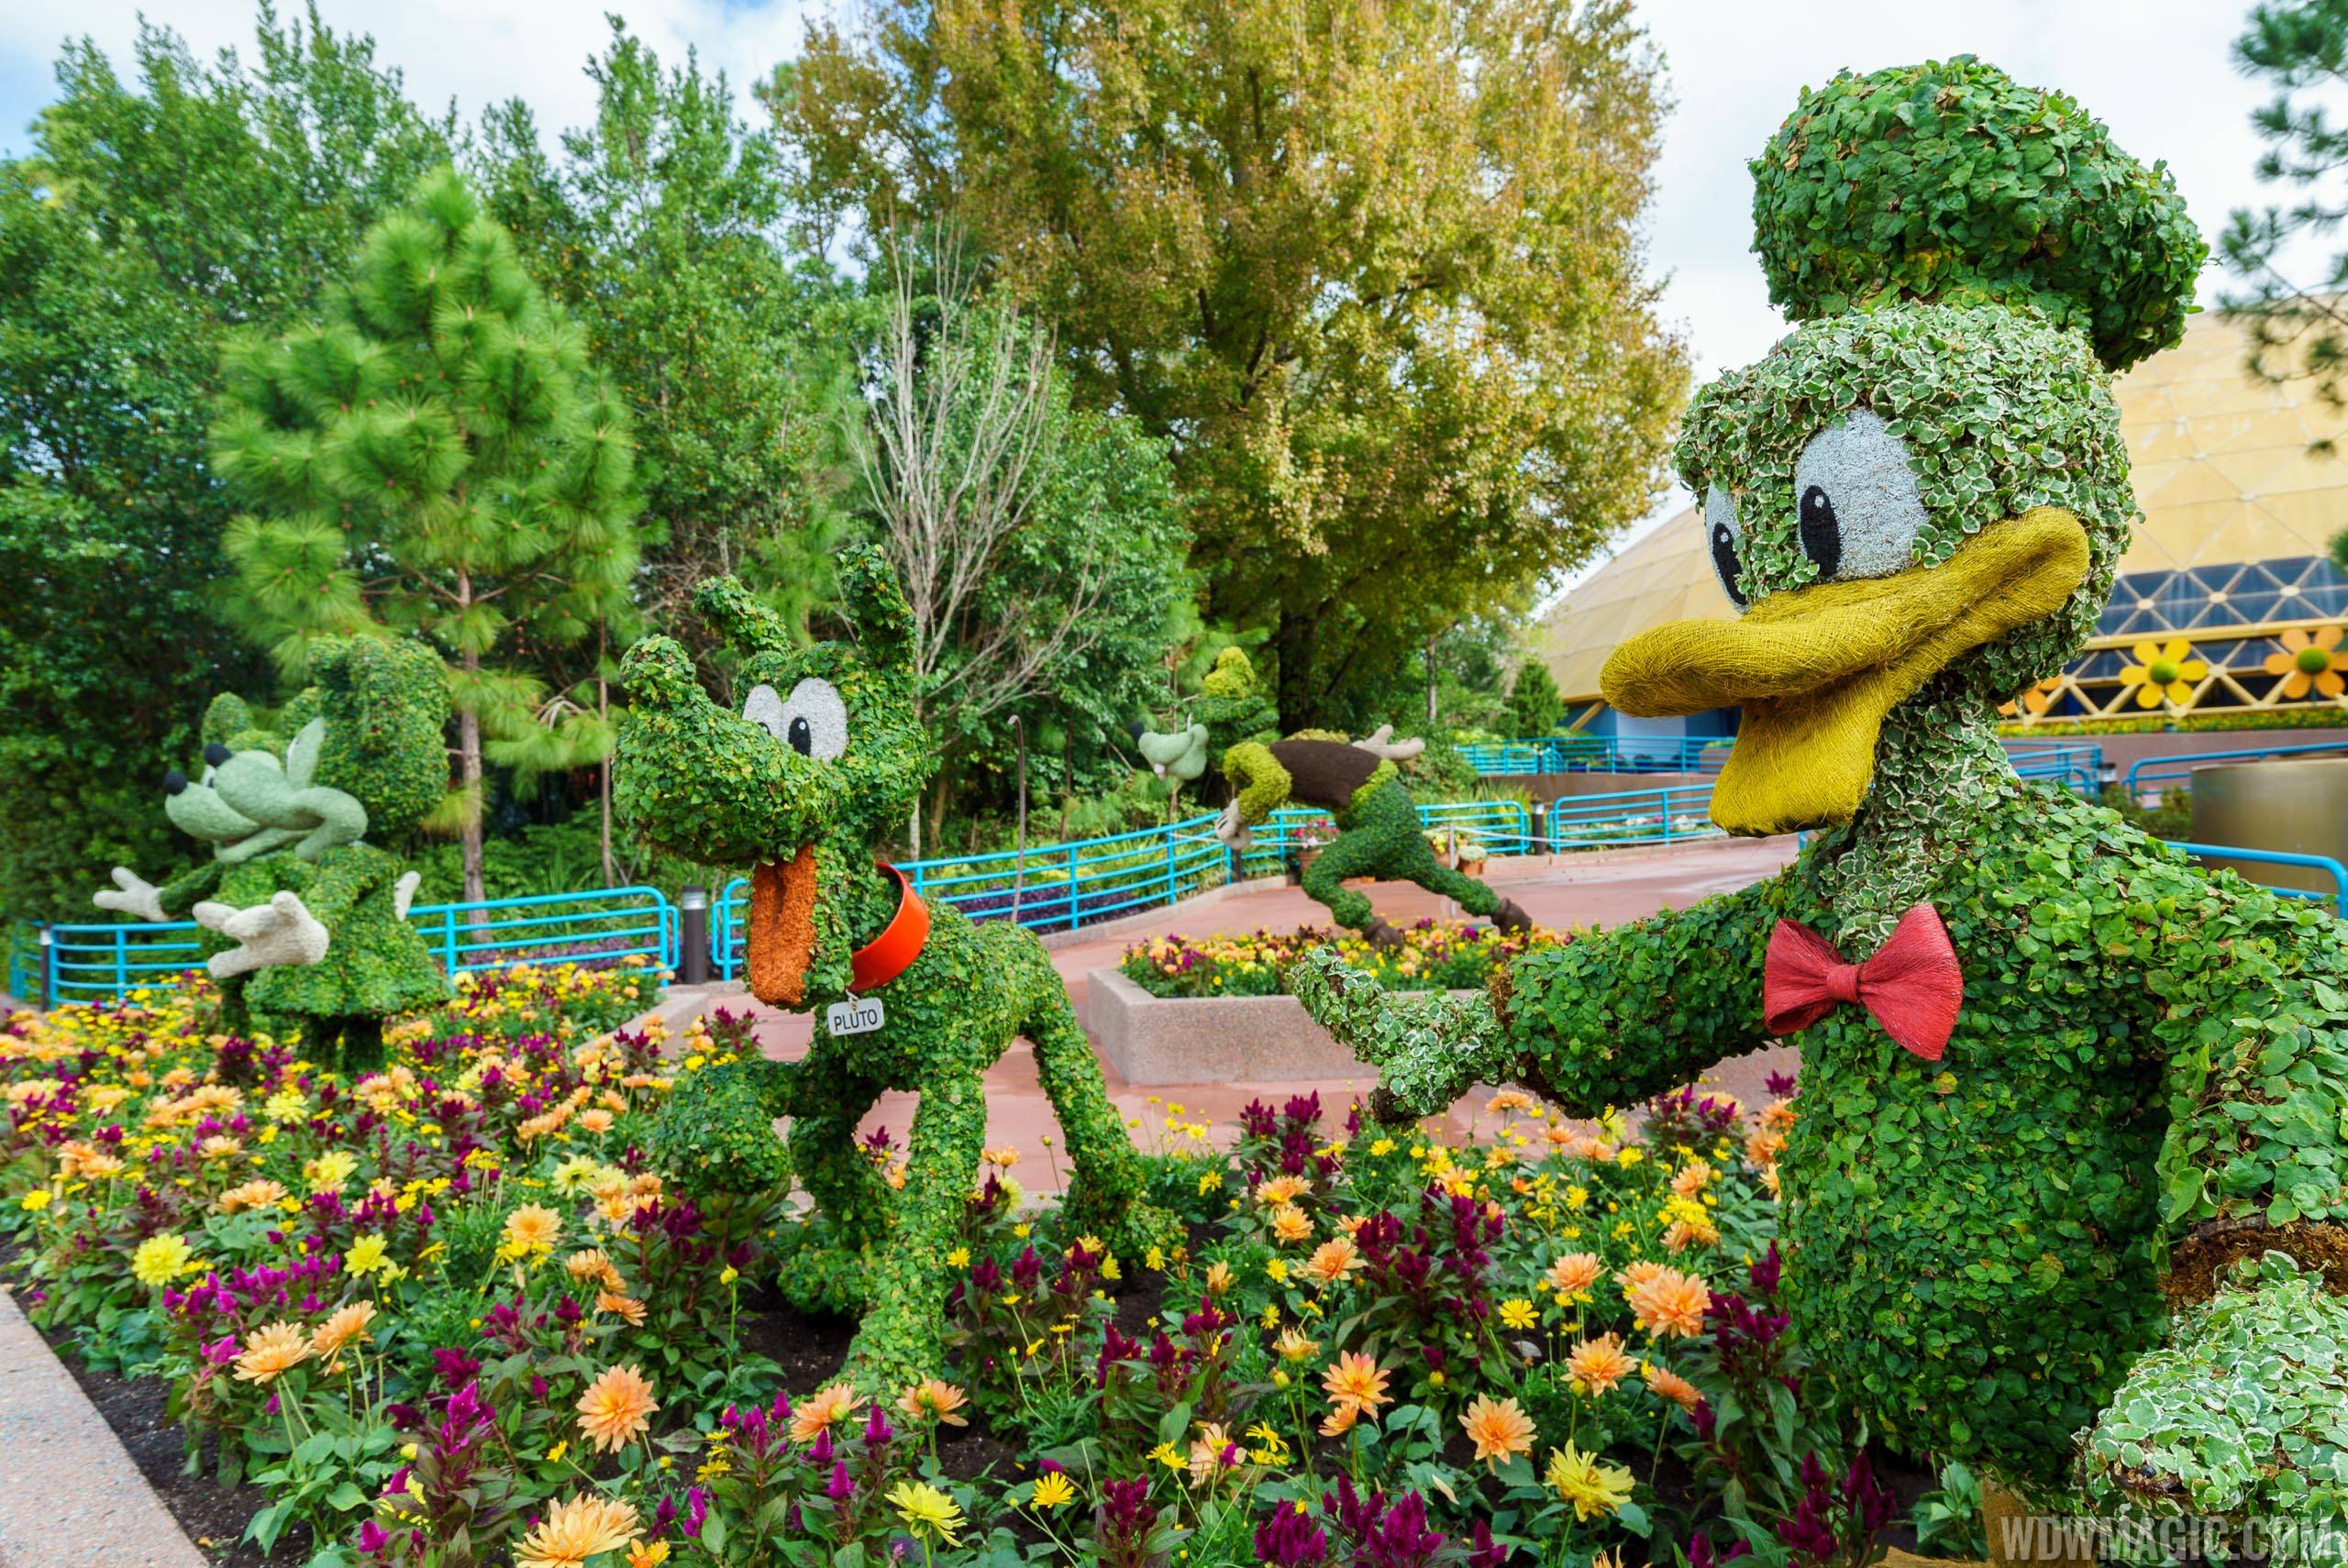 2017 Flower and Garden Festival - Donald and Pluto topiaries near Wonders of Life